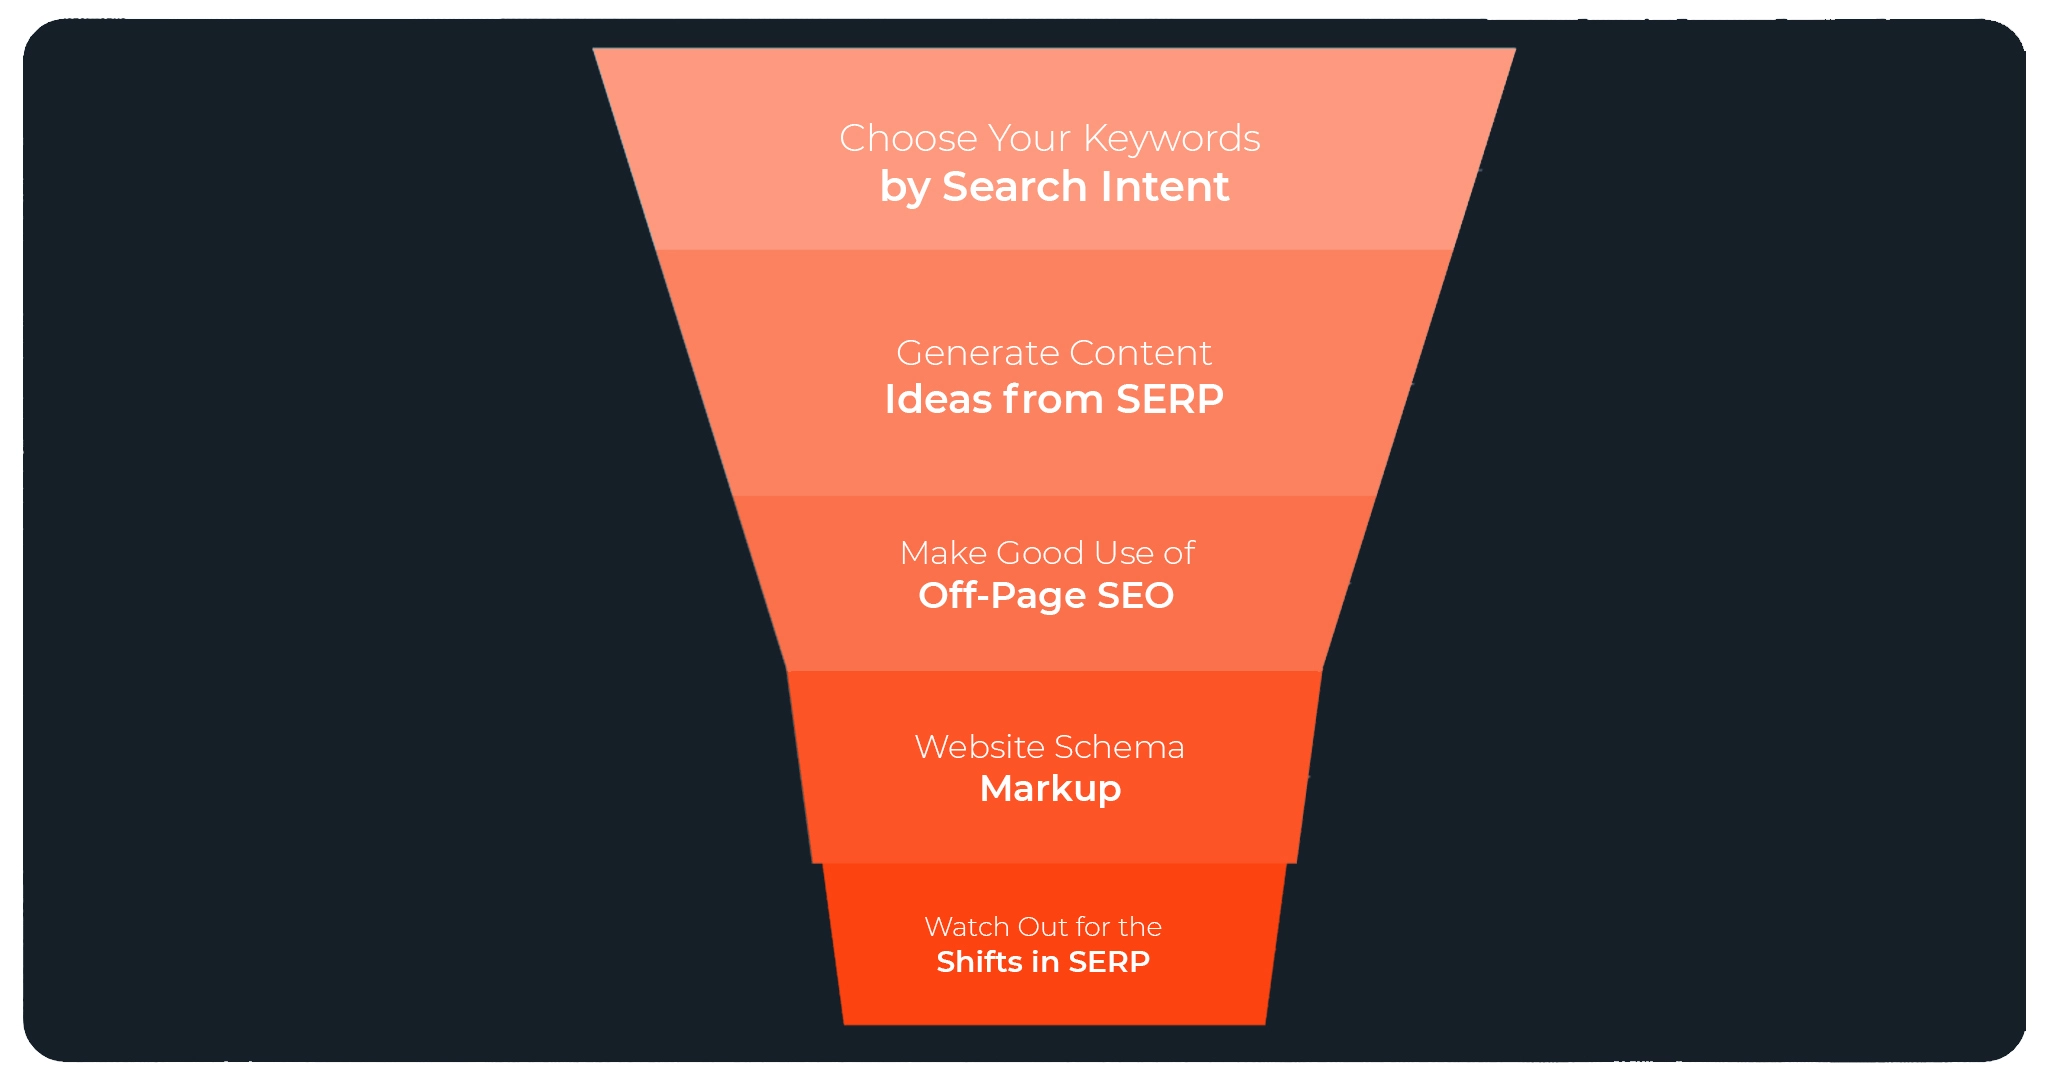 optimize your content for search intent